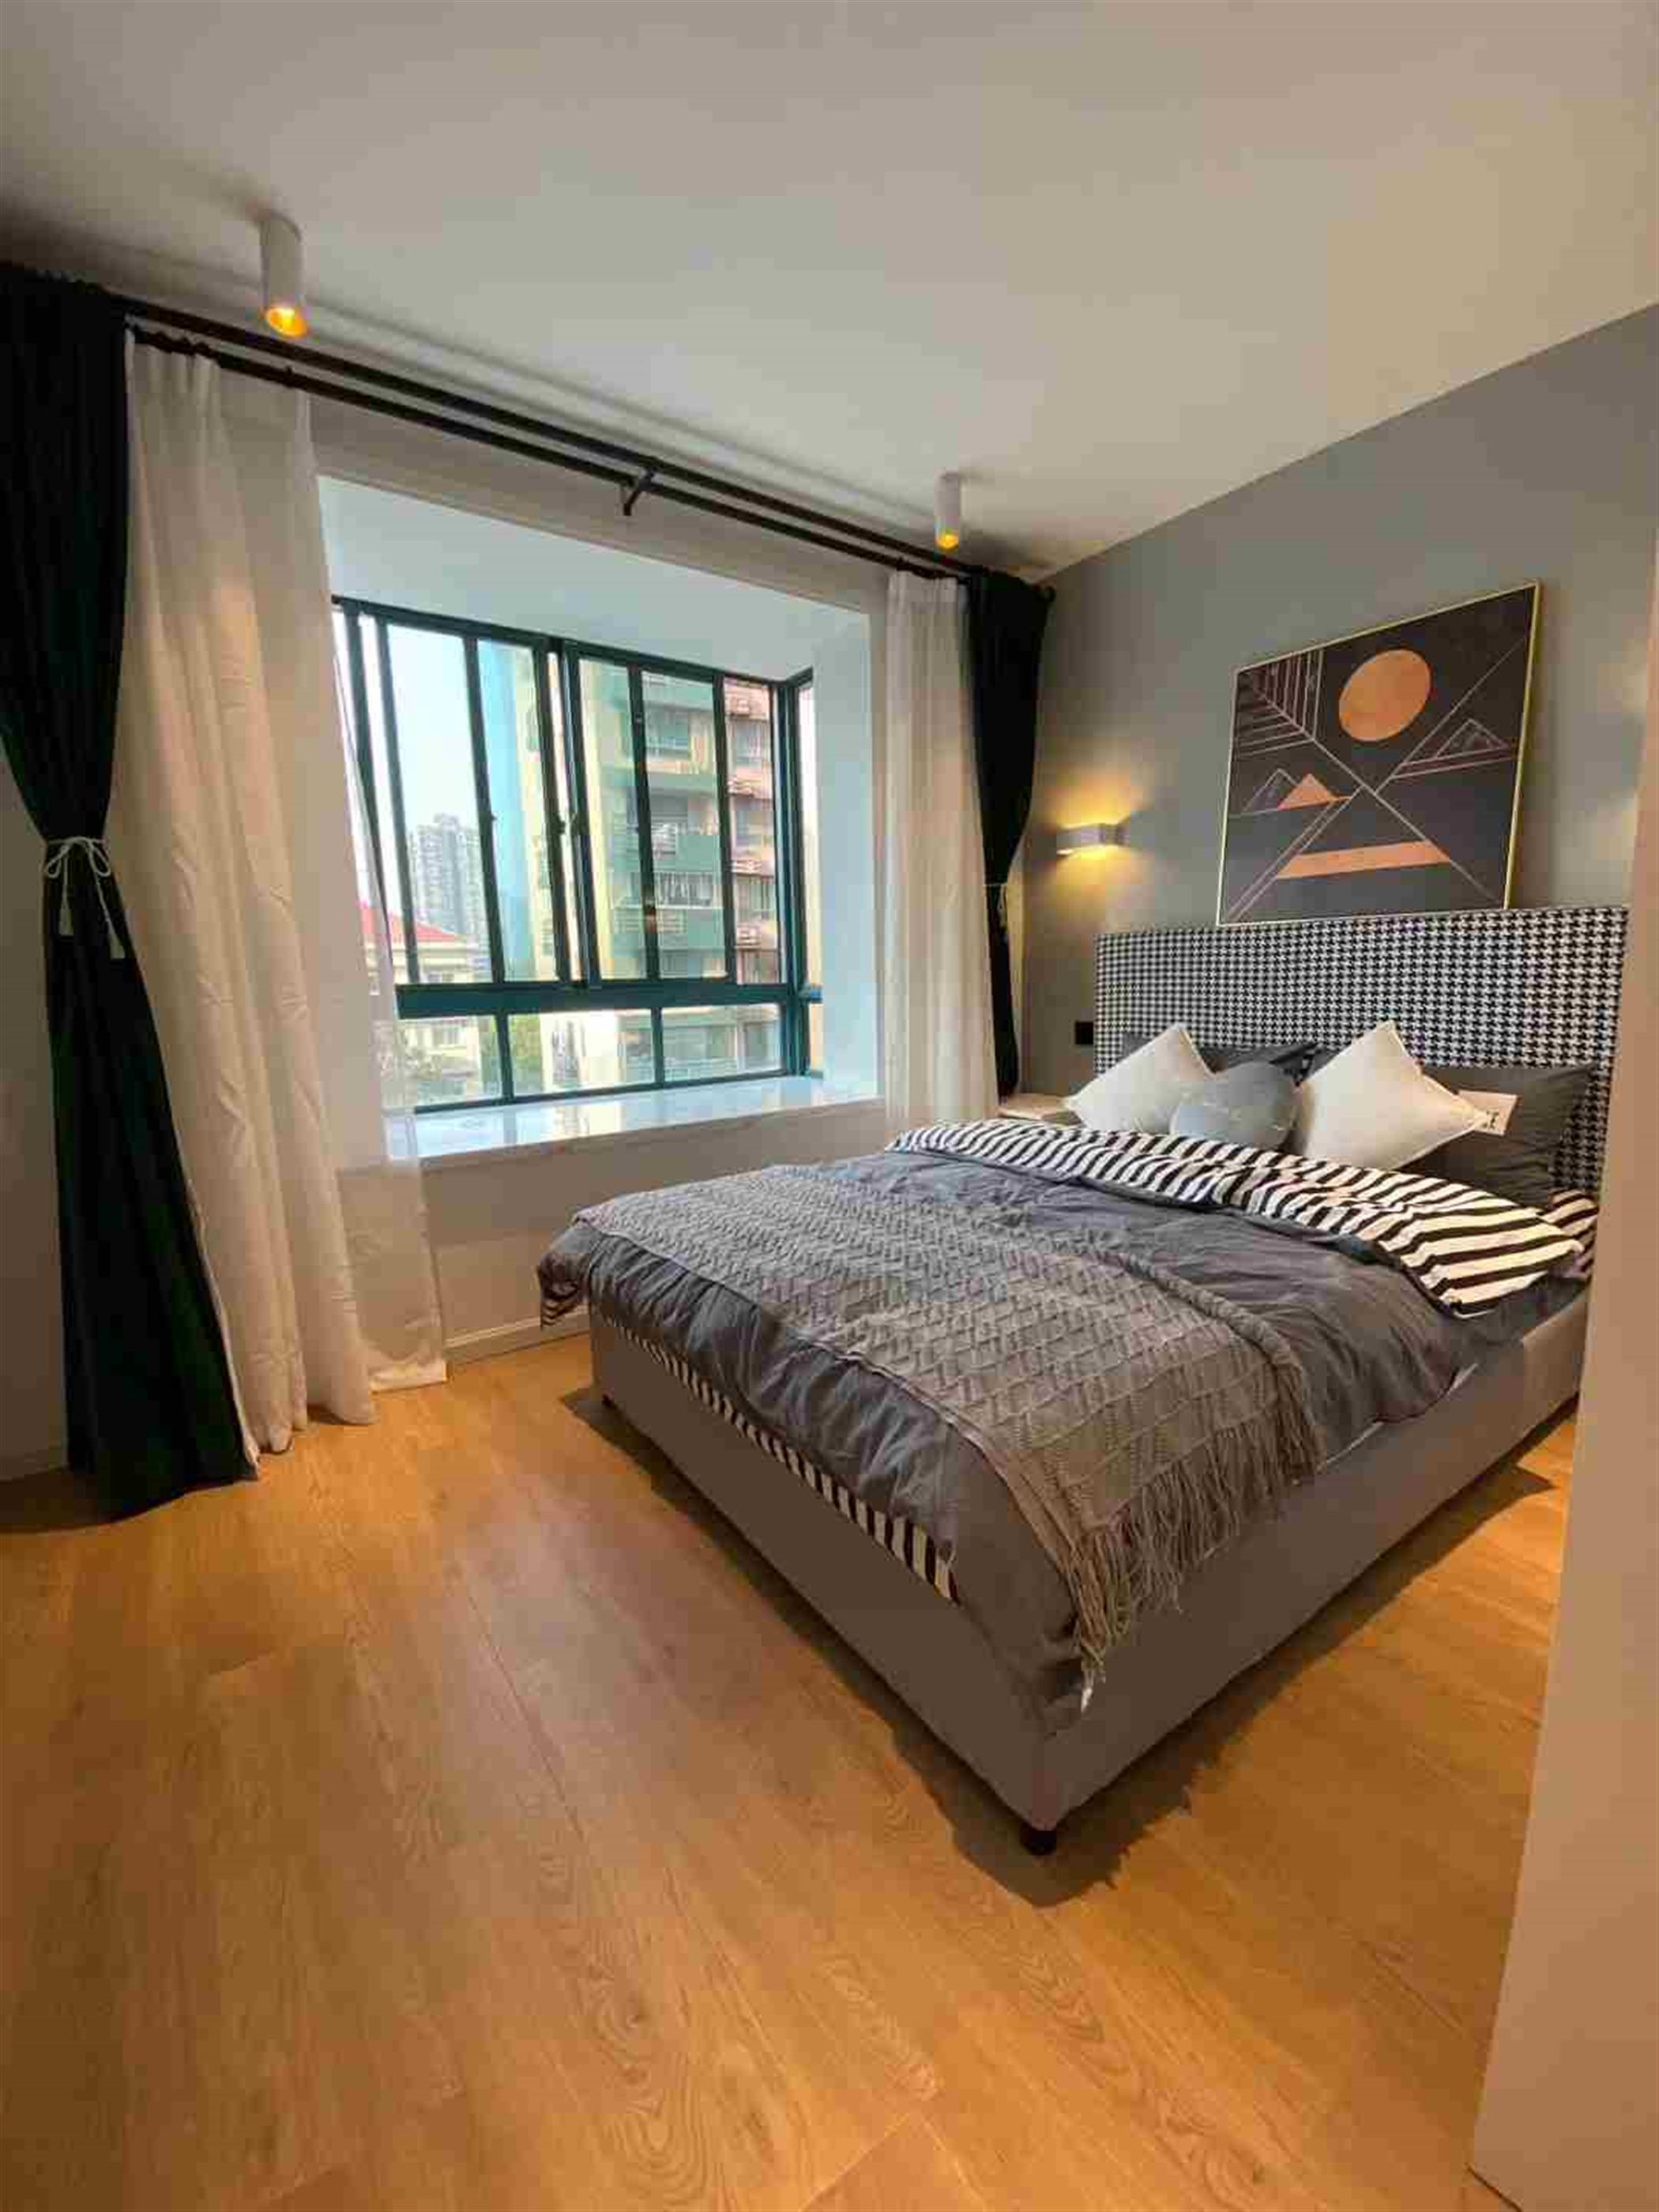 Bright bedroom Modern Bright Spacious 150SQM 3BR Apt nr LN 4/7/9 for Rent in Shanghai